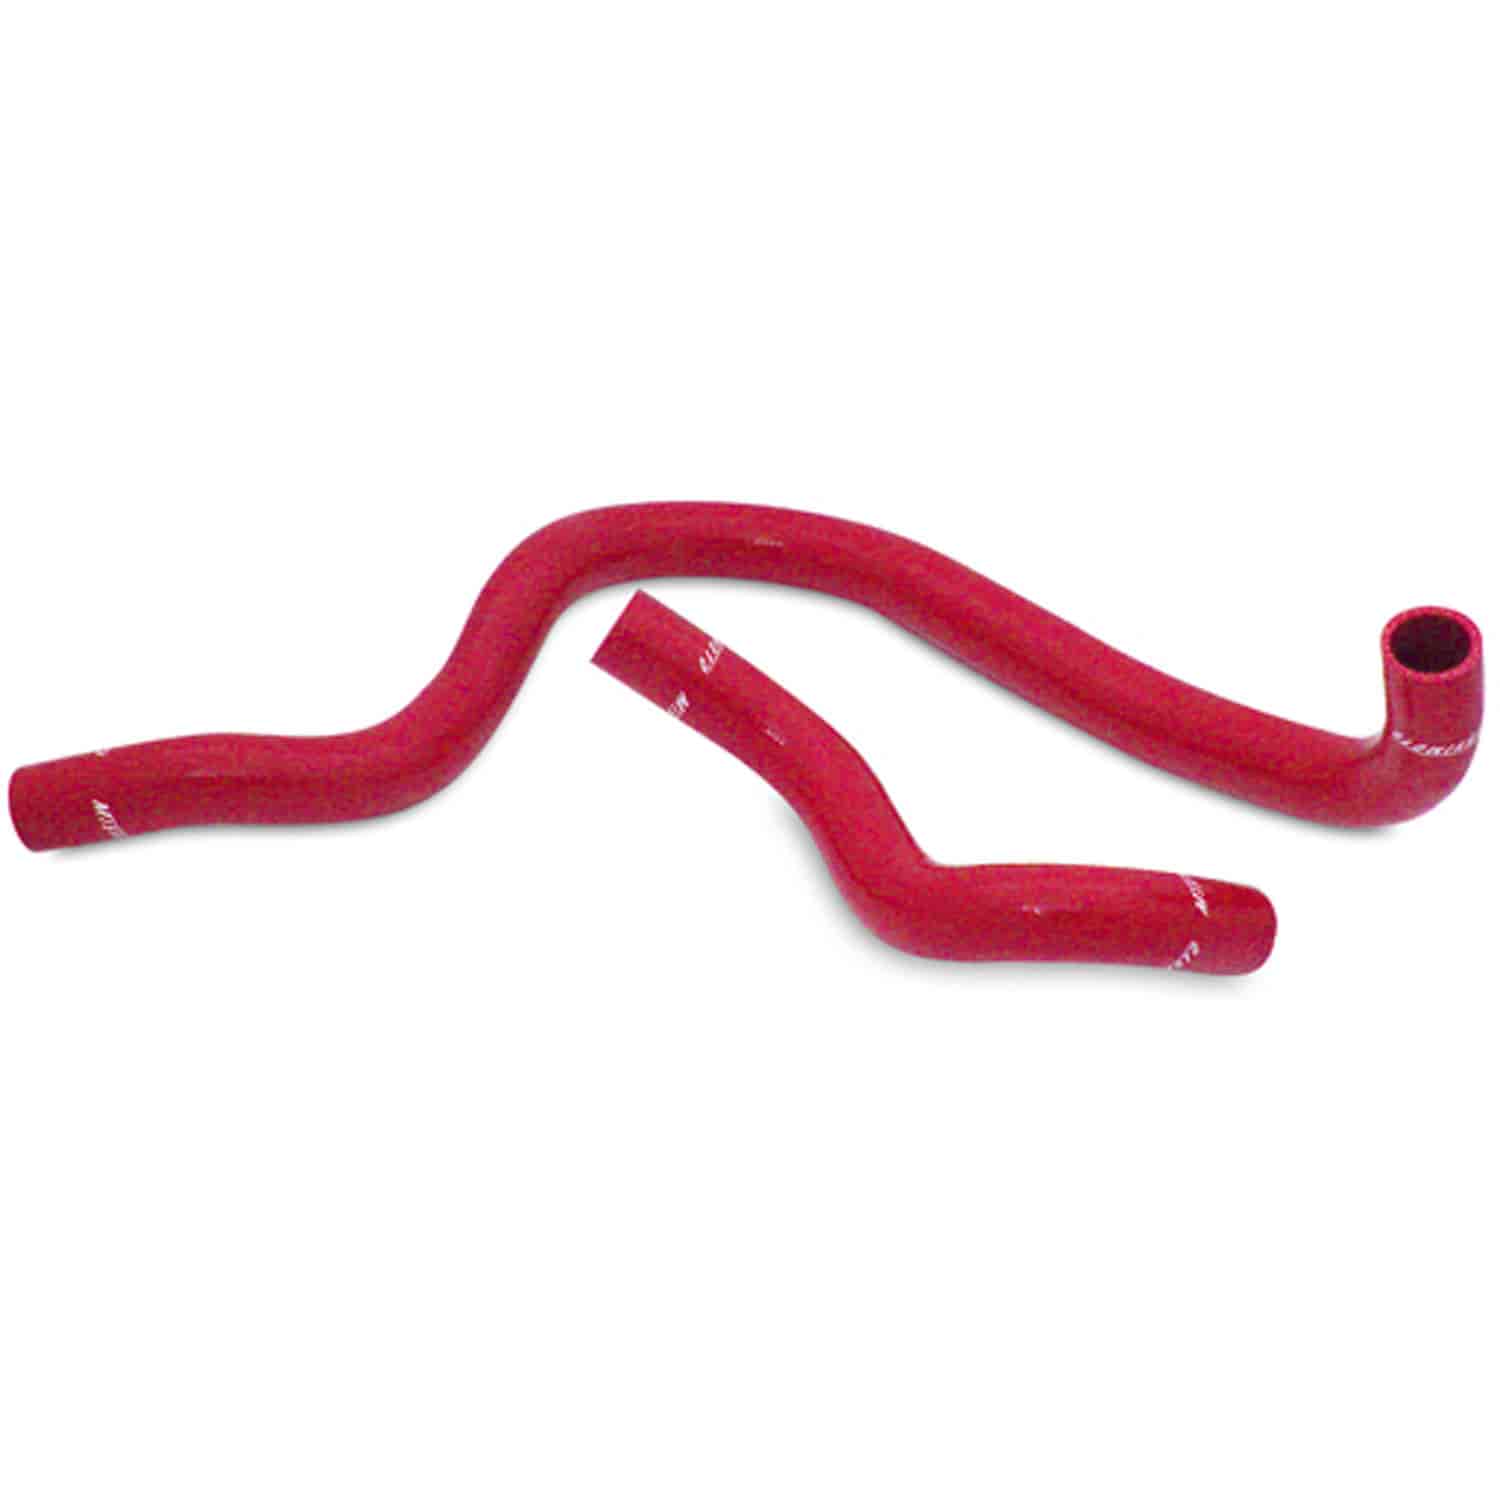 Silicone Radiator Hose Kit.This kit will fit both the Honda Prelude and Accord. - MFG Part No. MMHOSE-PRE-97RD